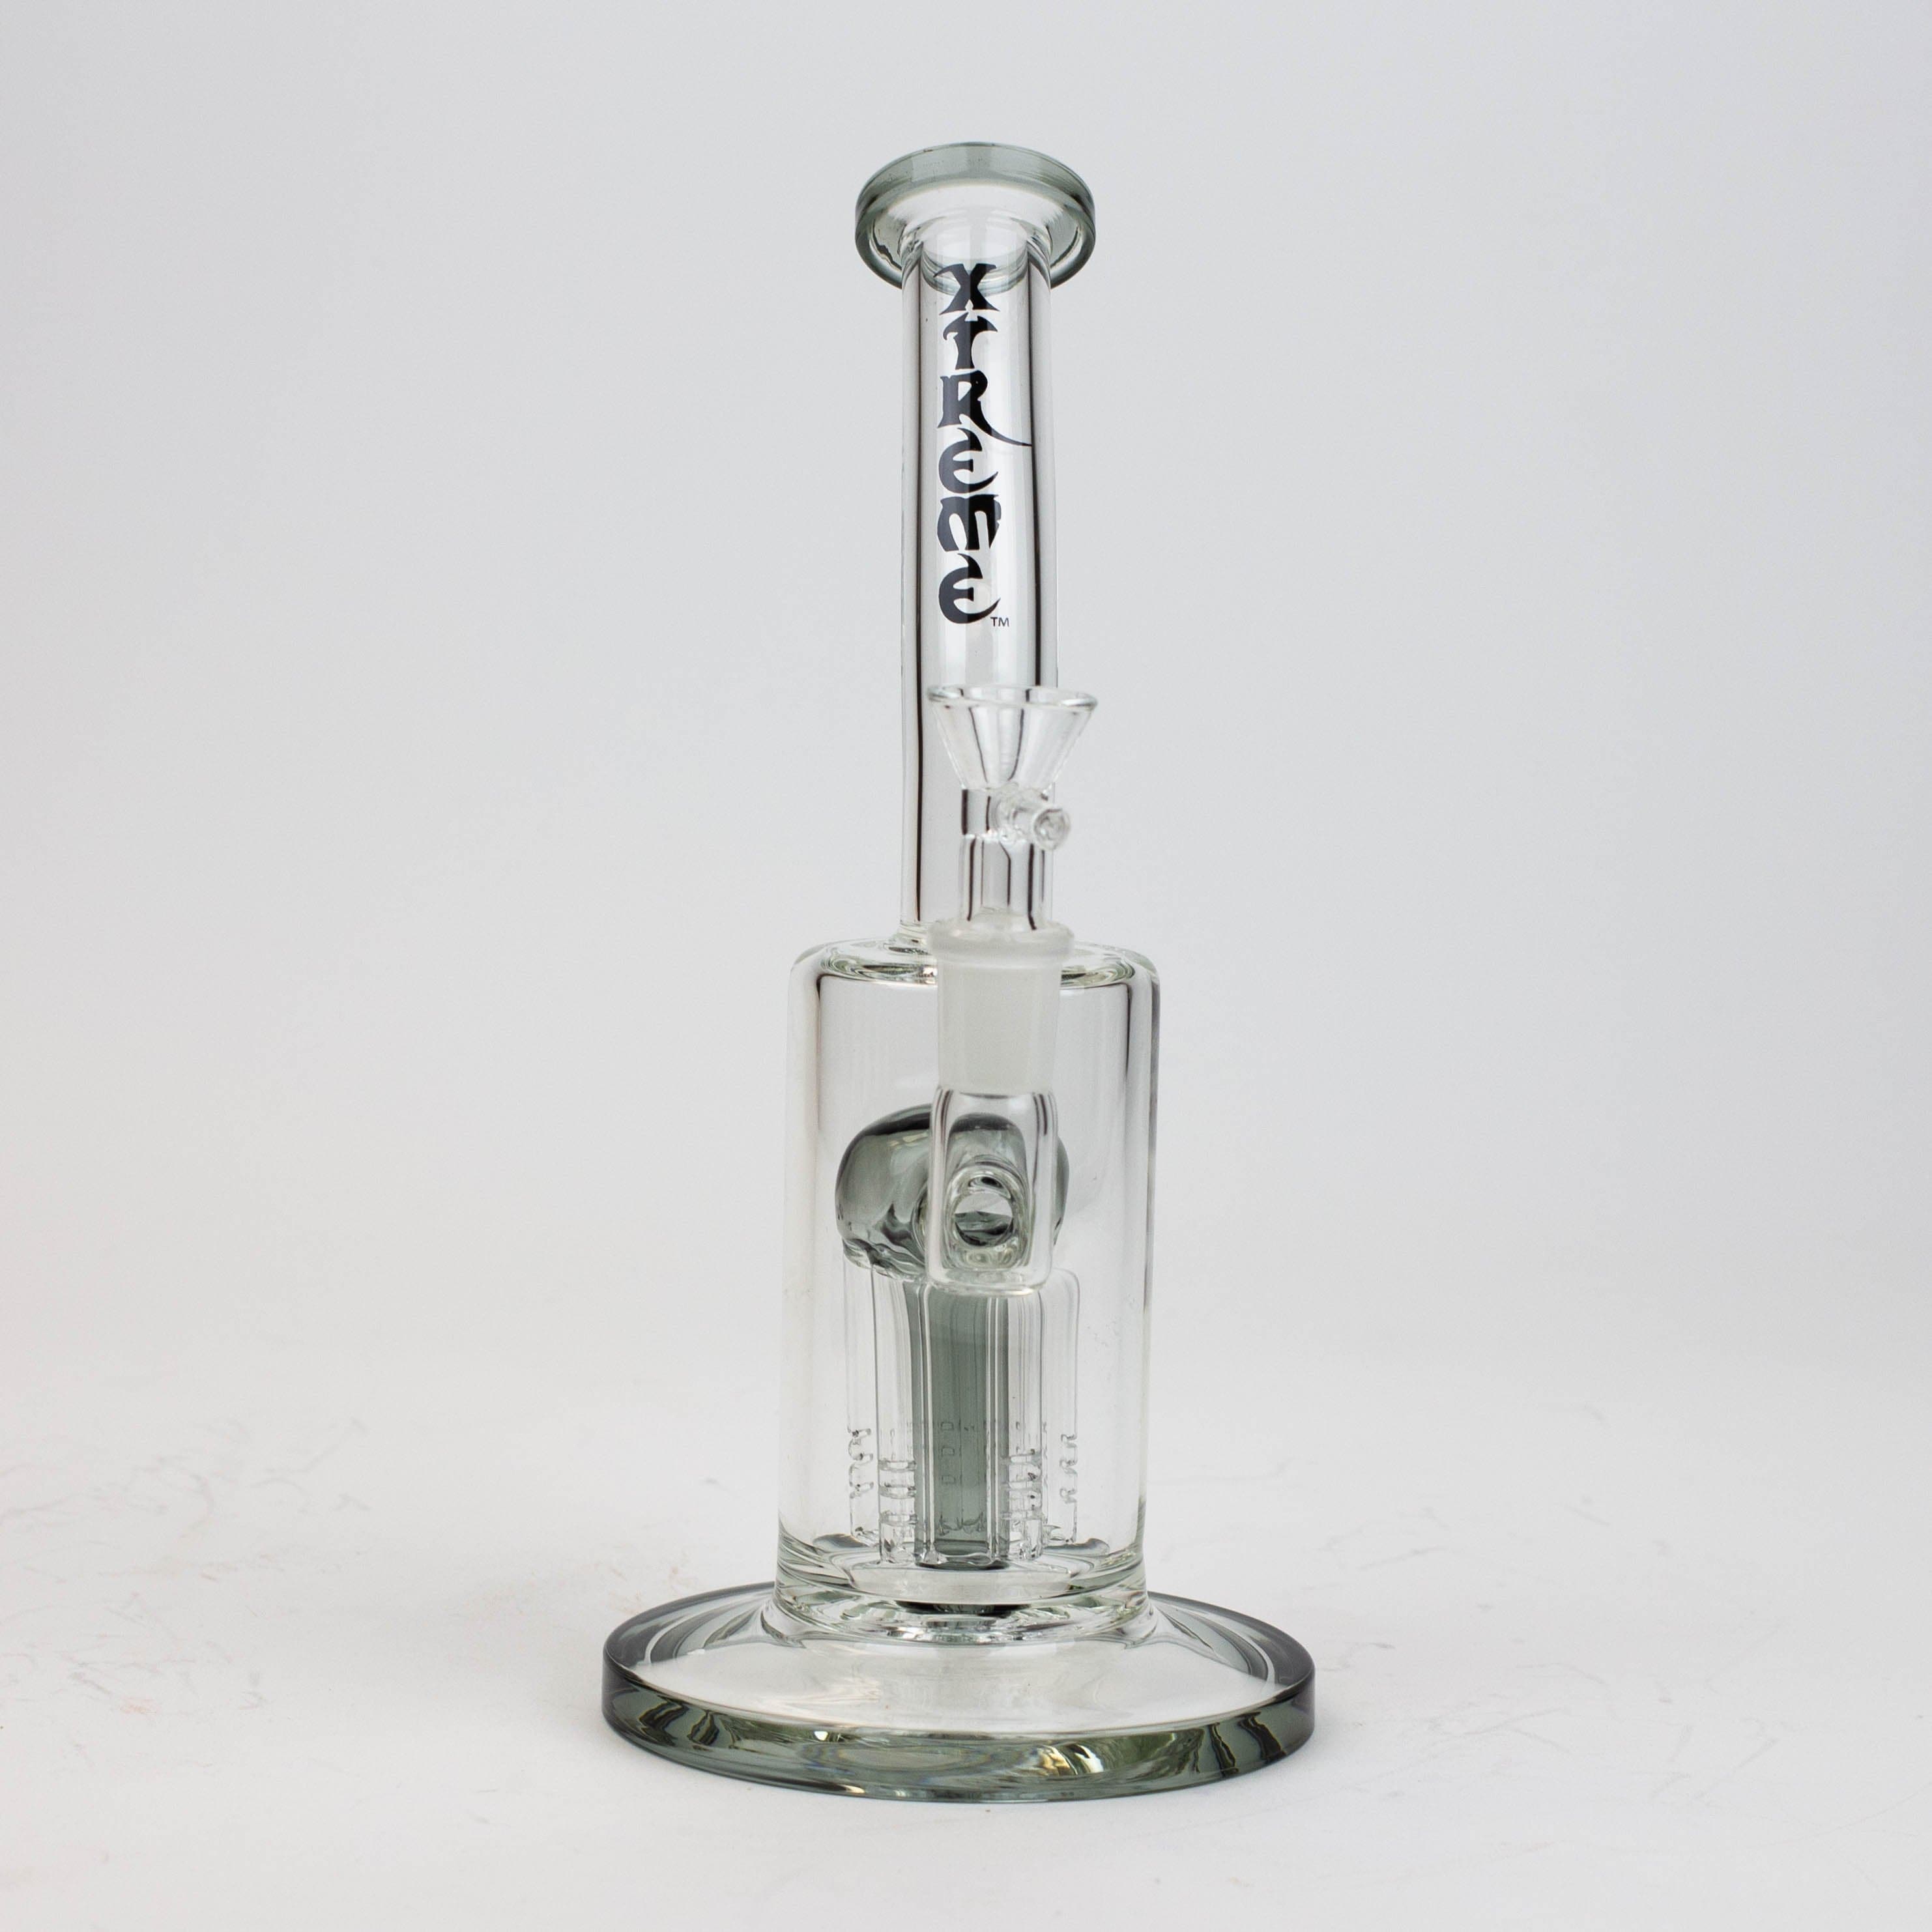 Xtreme tree-arm diffuser glass pipes_8